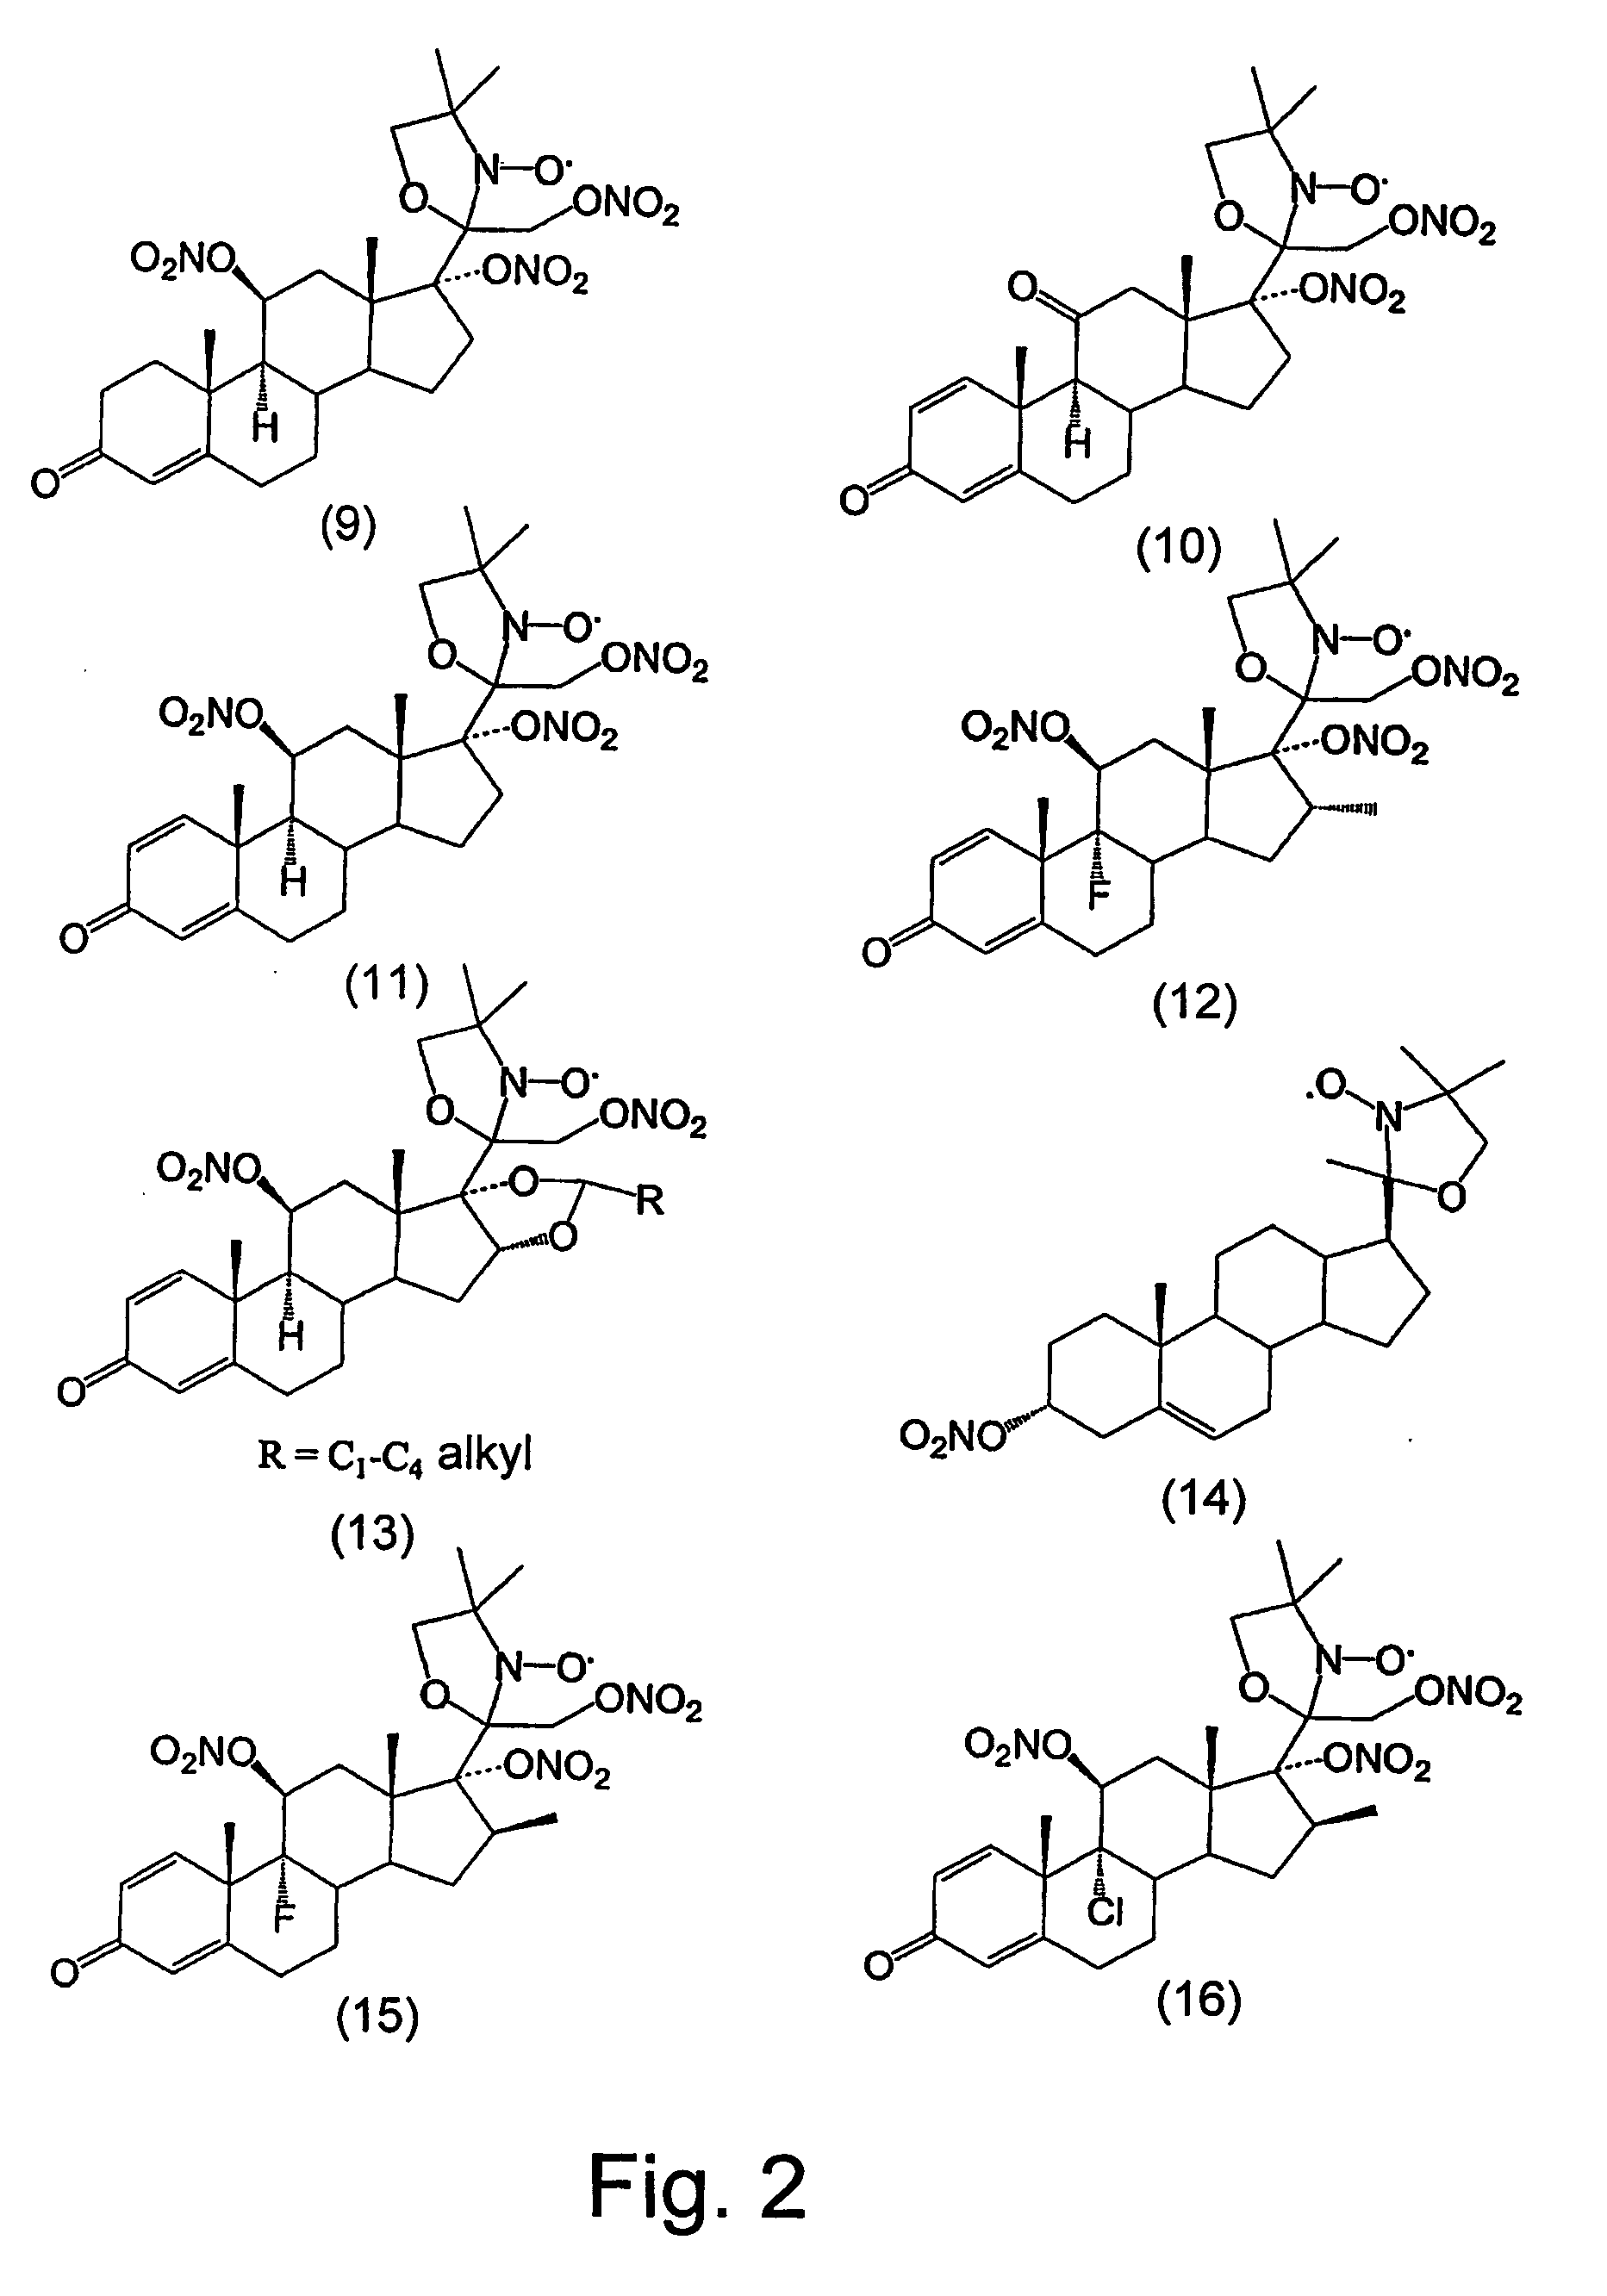 Steroid compounds comprising superoxide dismutase mimic groups and nitric oxide donor groups, and their use in the preparation of medicaments